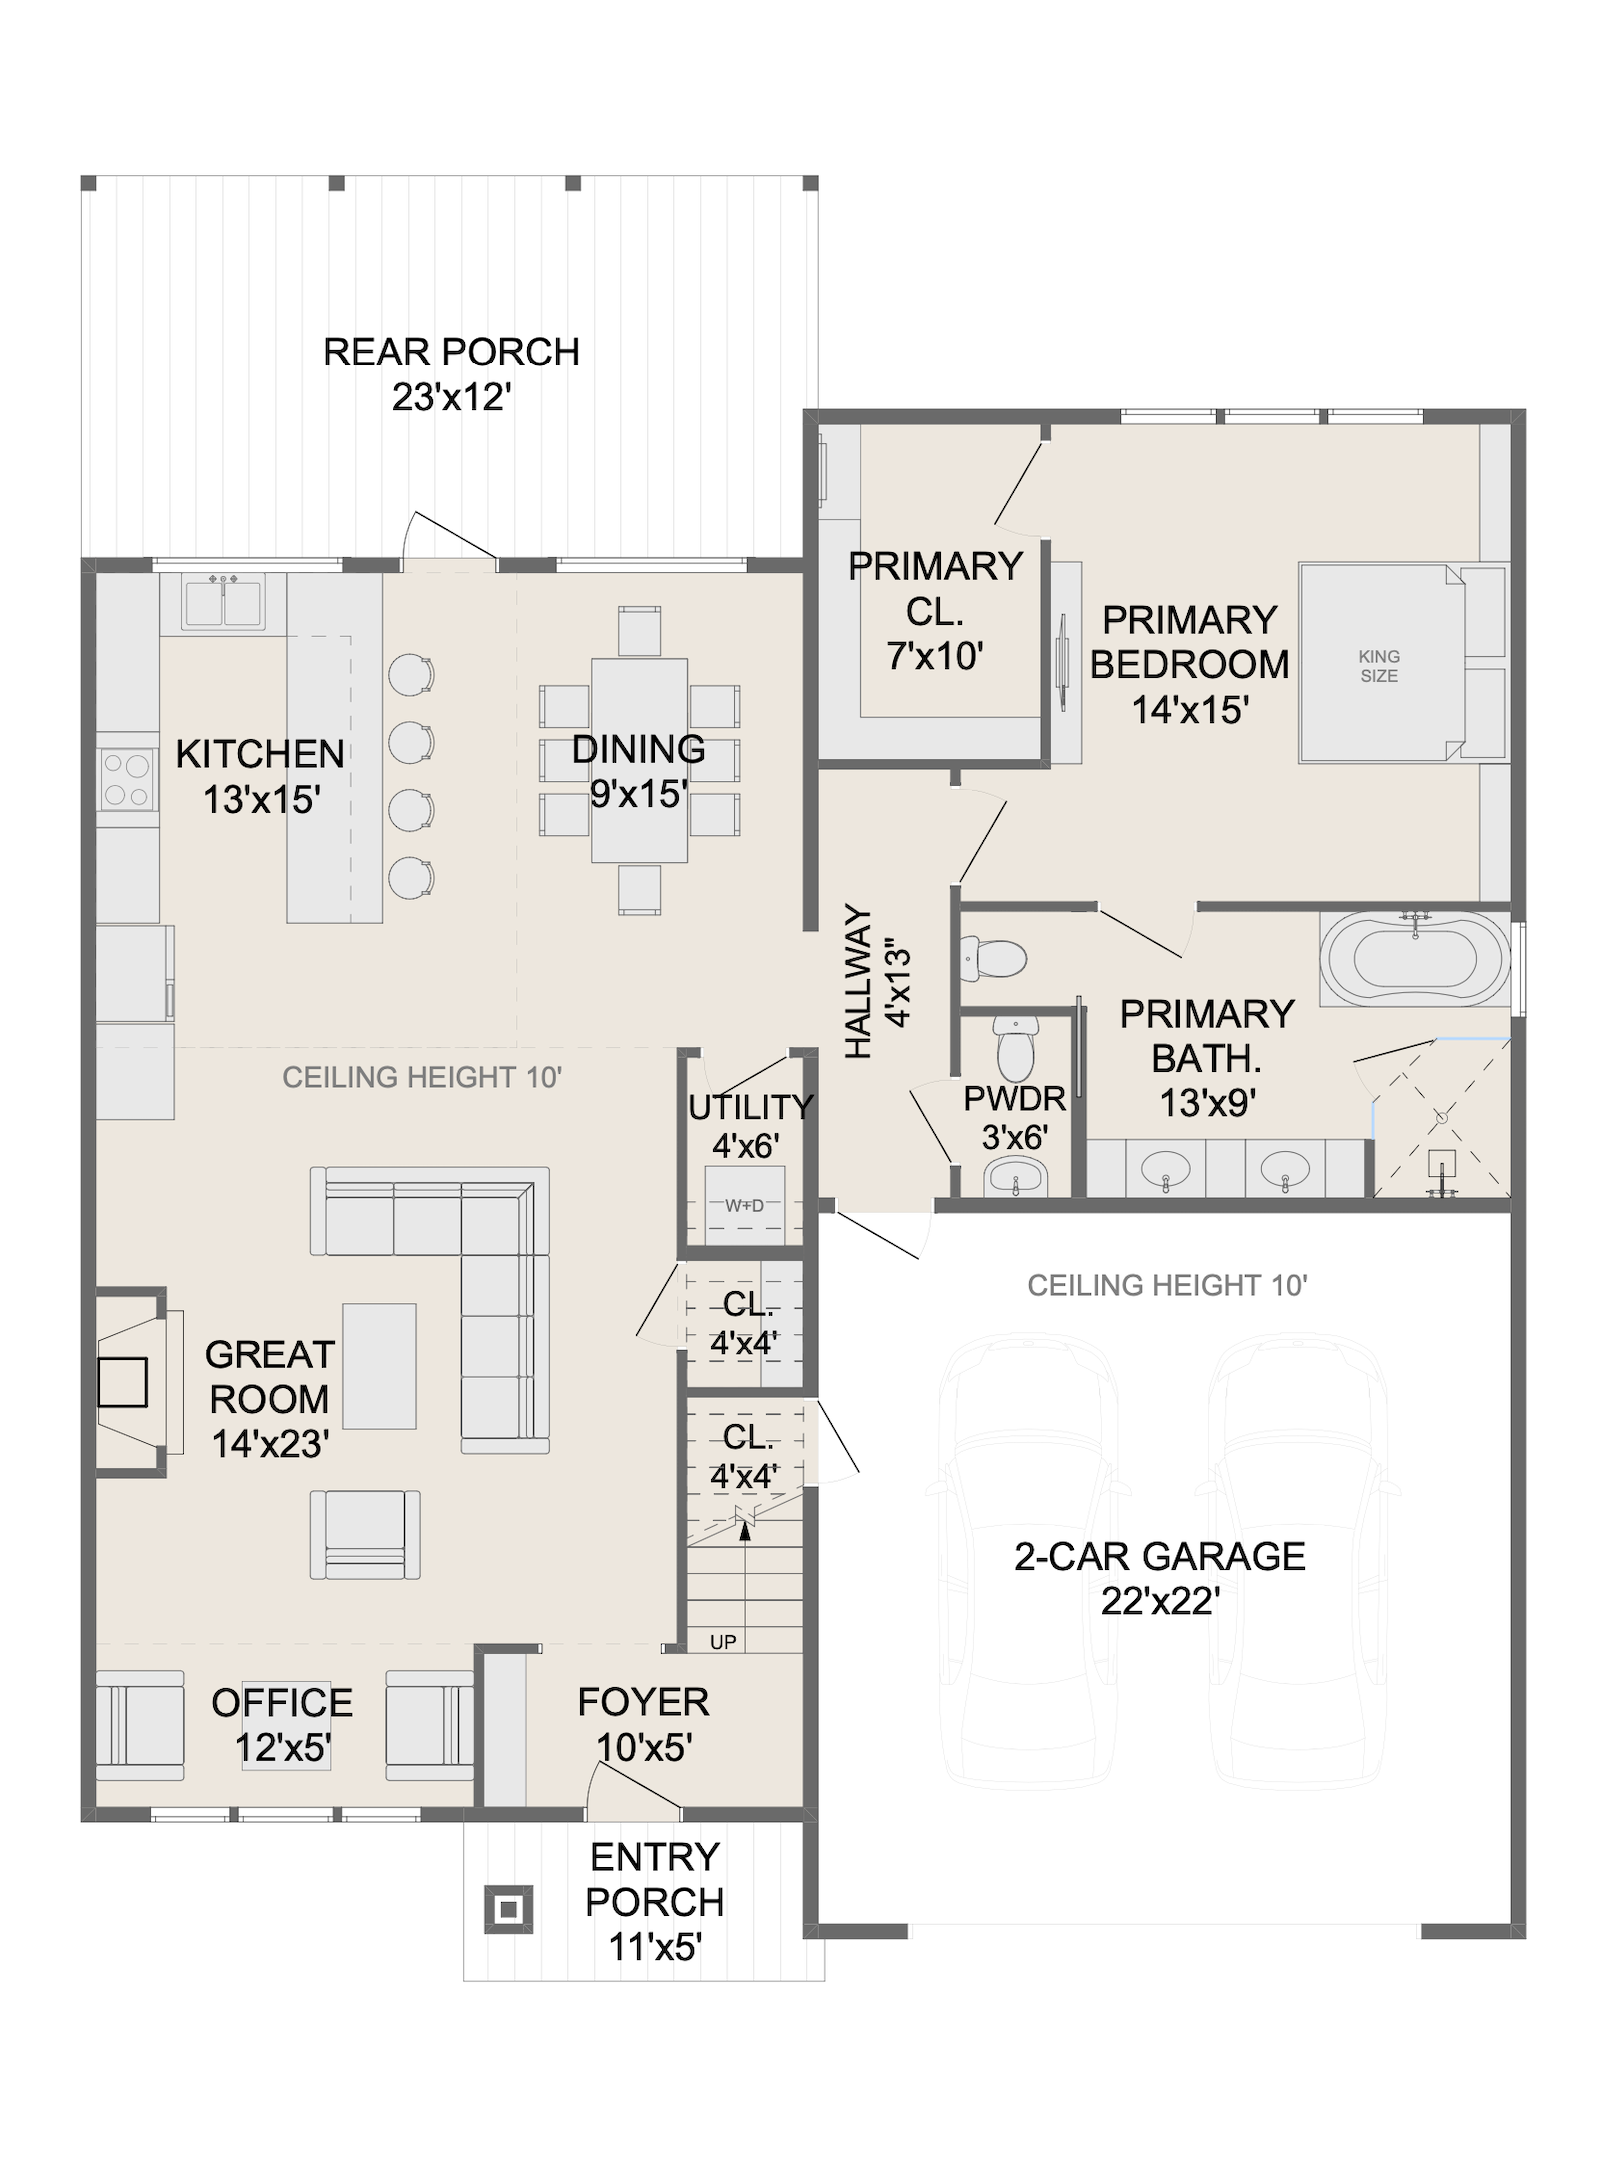 The Cherry Orchard. Floor Plans for Family Houses, New House Plans